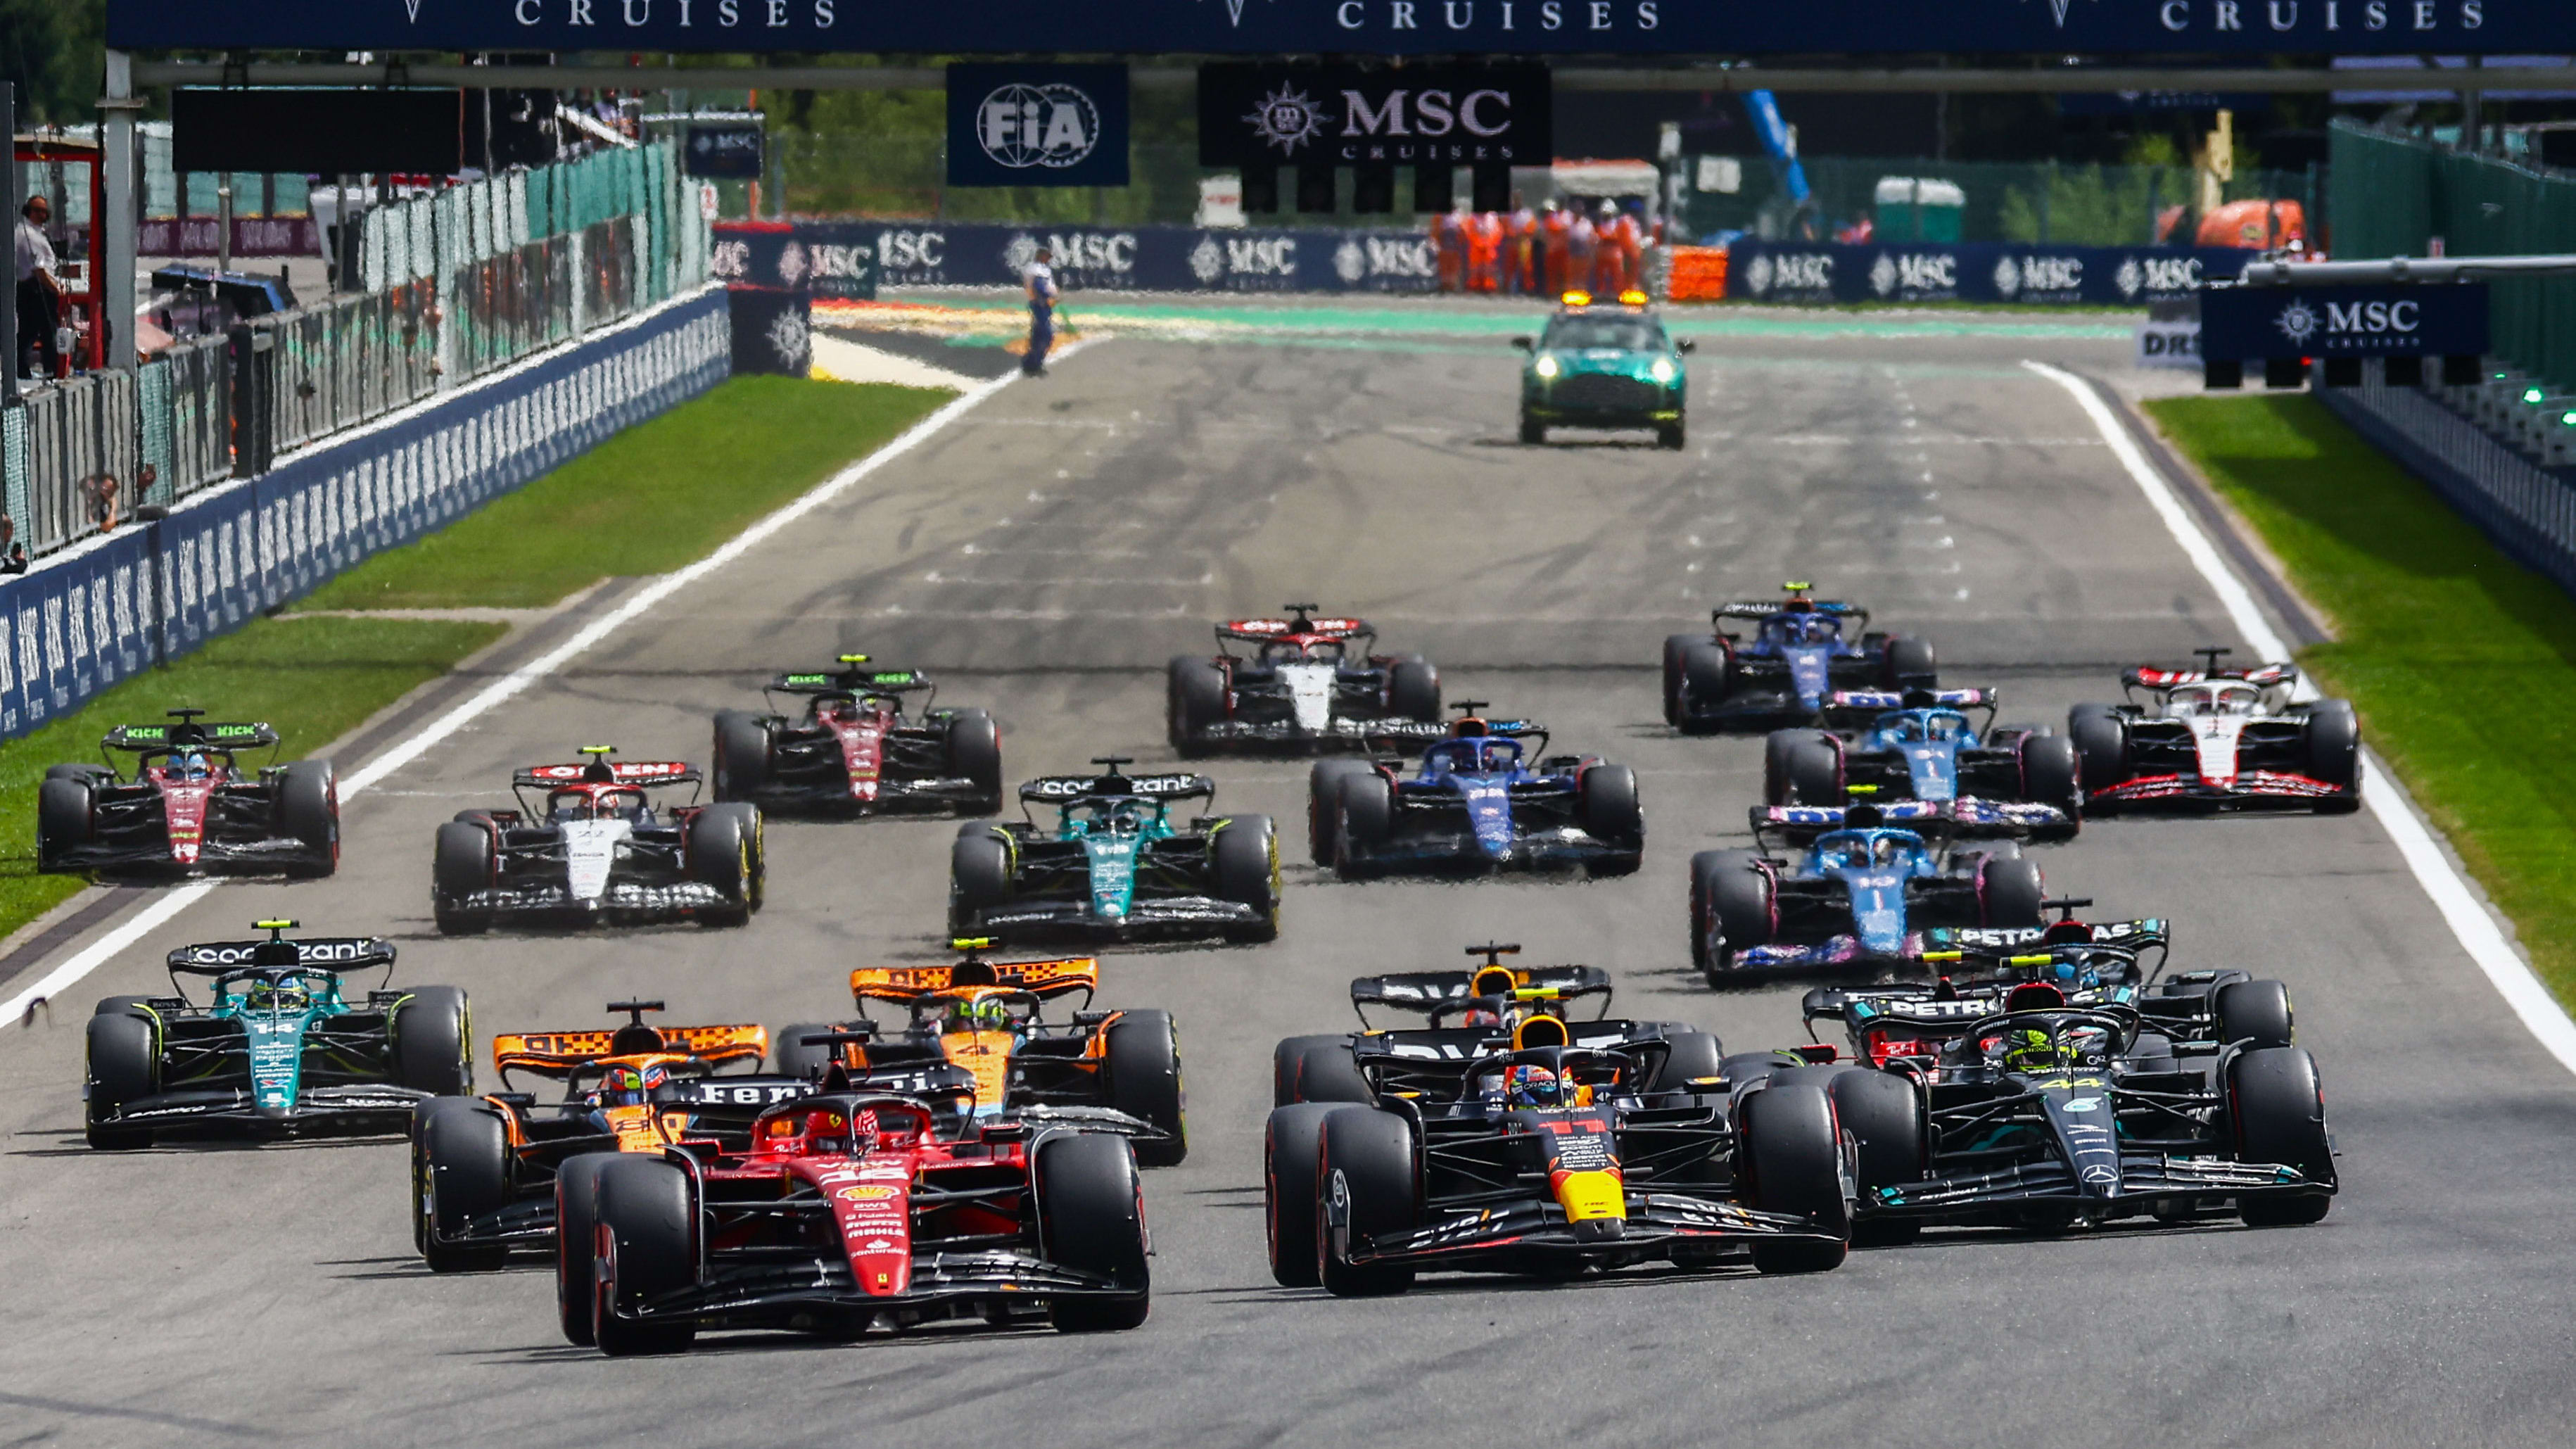 Get closer to the twists and turns during the second half of the 2023 season with F1 TV Formula 1®